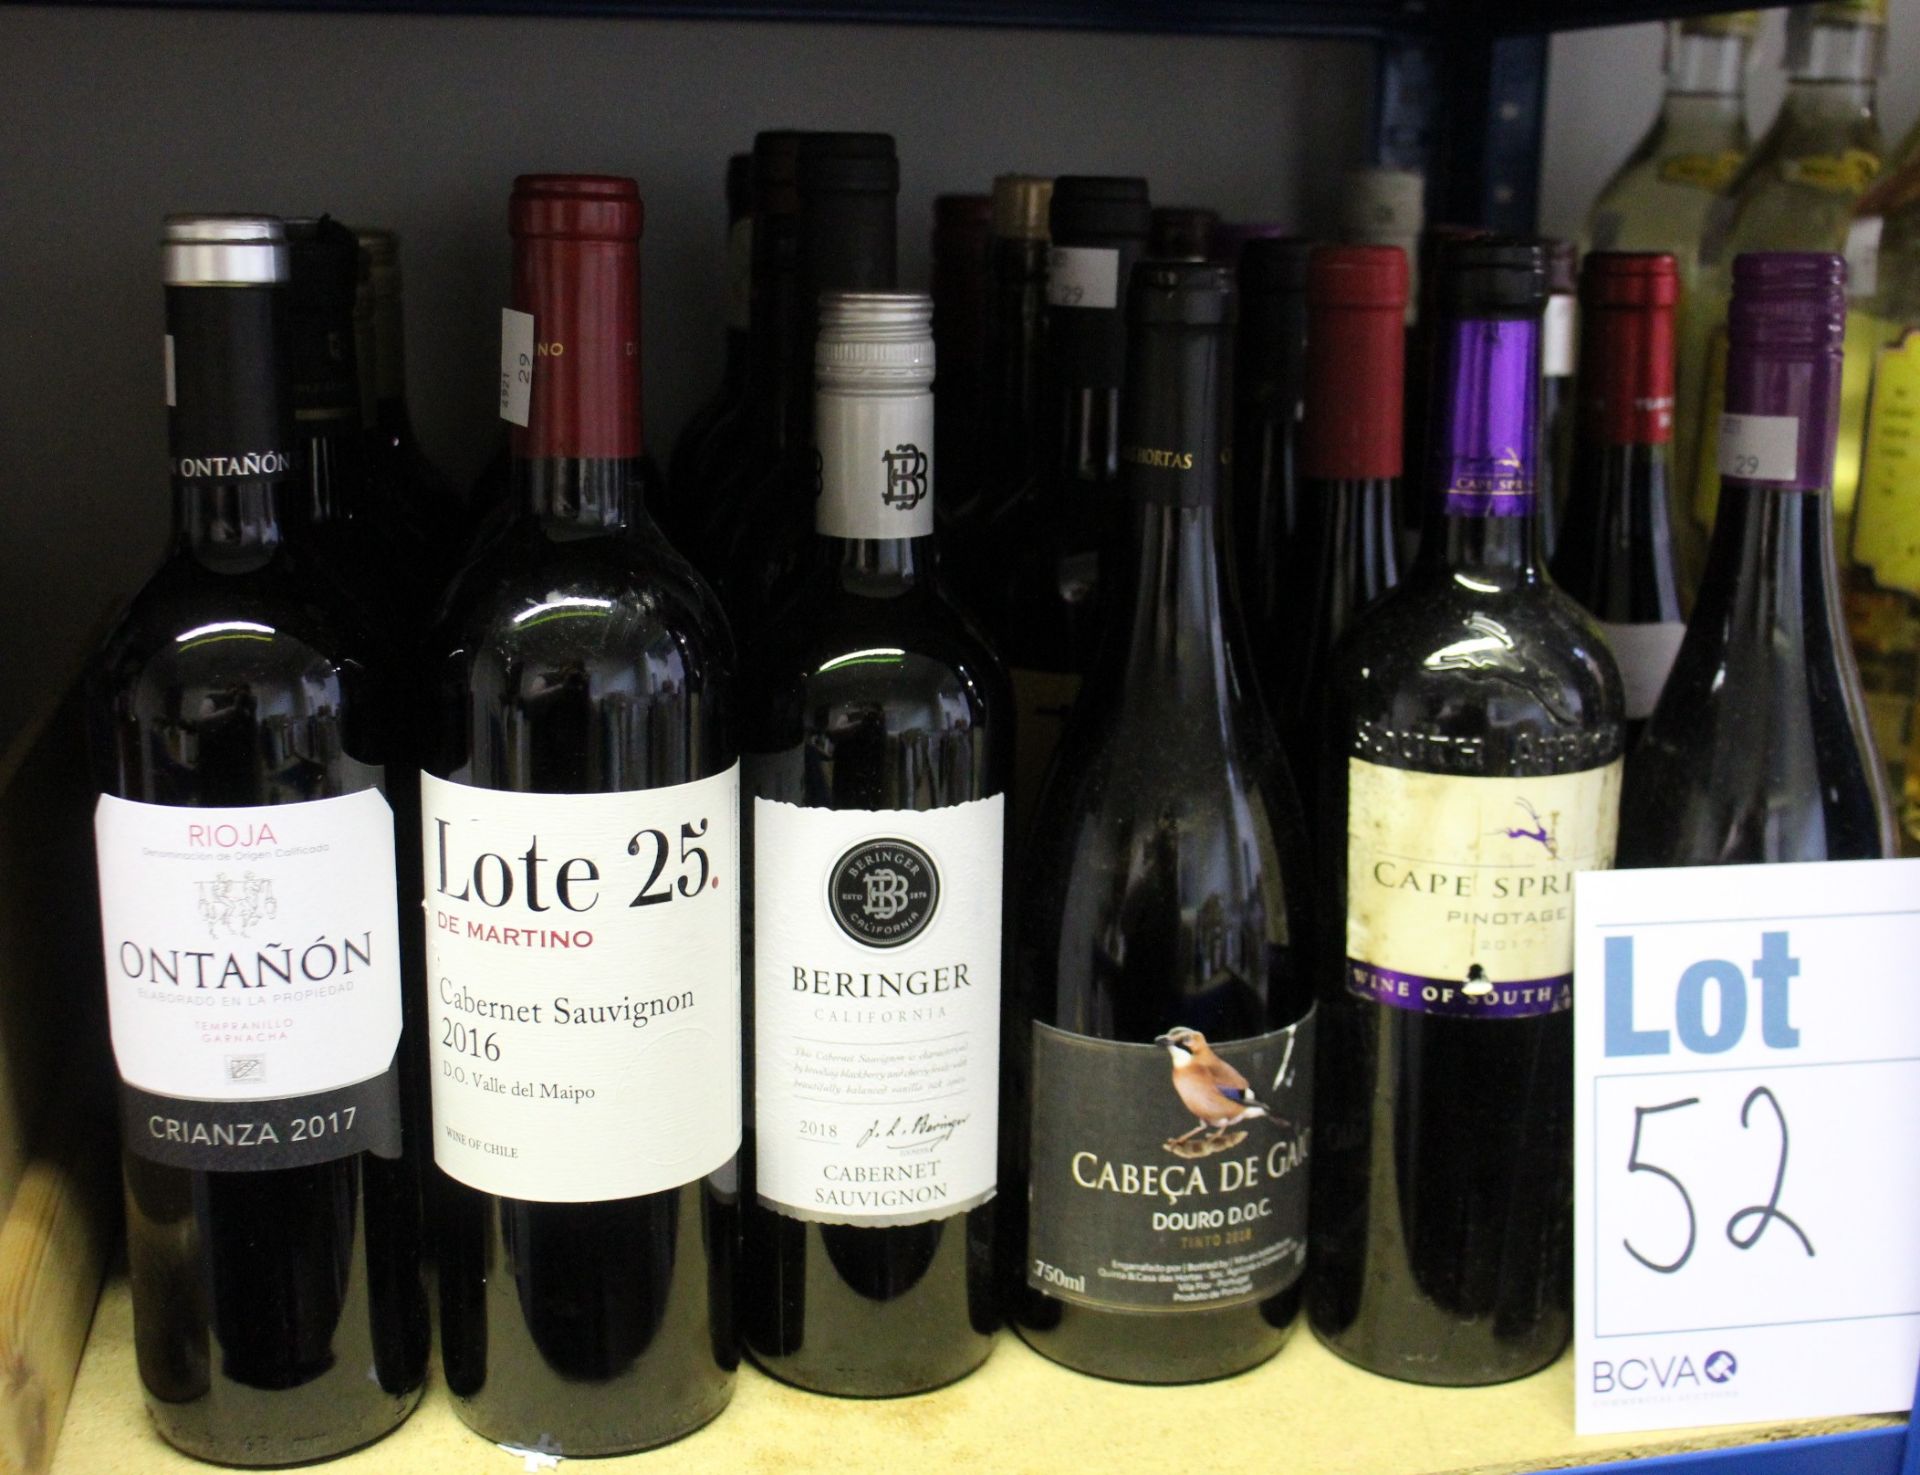 A quantity of red wines to include Lote 25, Ontanon, Cabeca De Gaio, Cape Spring, Beringer and